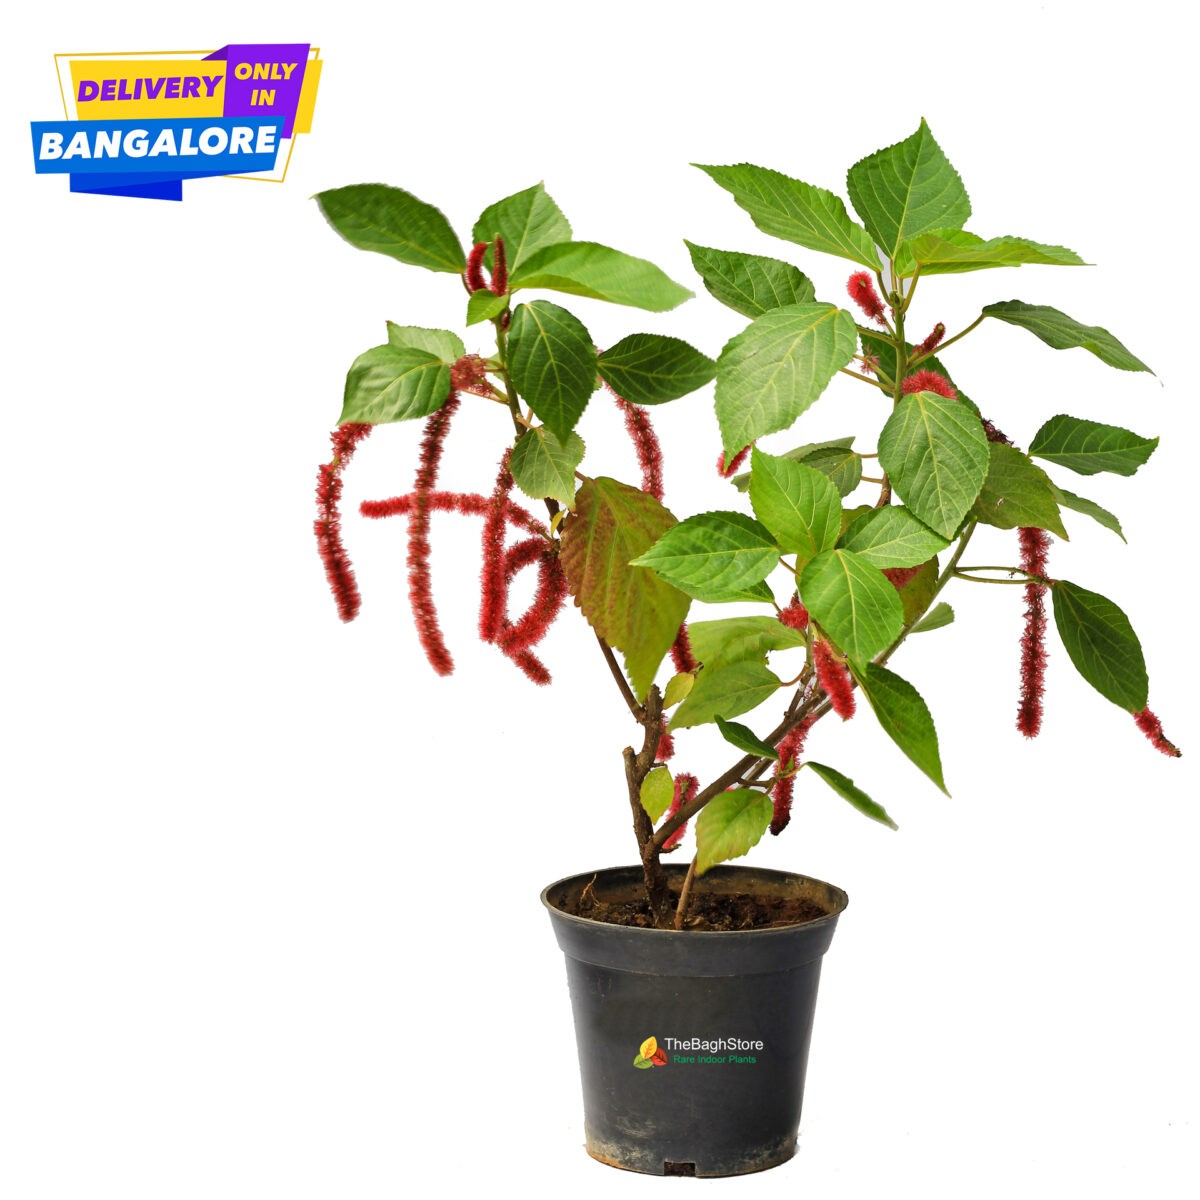 Acalypha hispida plant with red flower Bangalore Delivery only